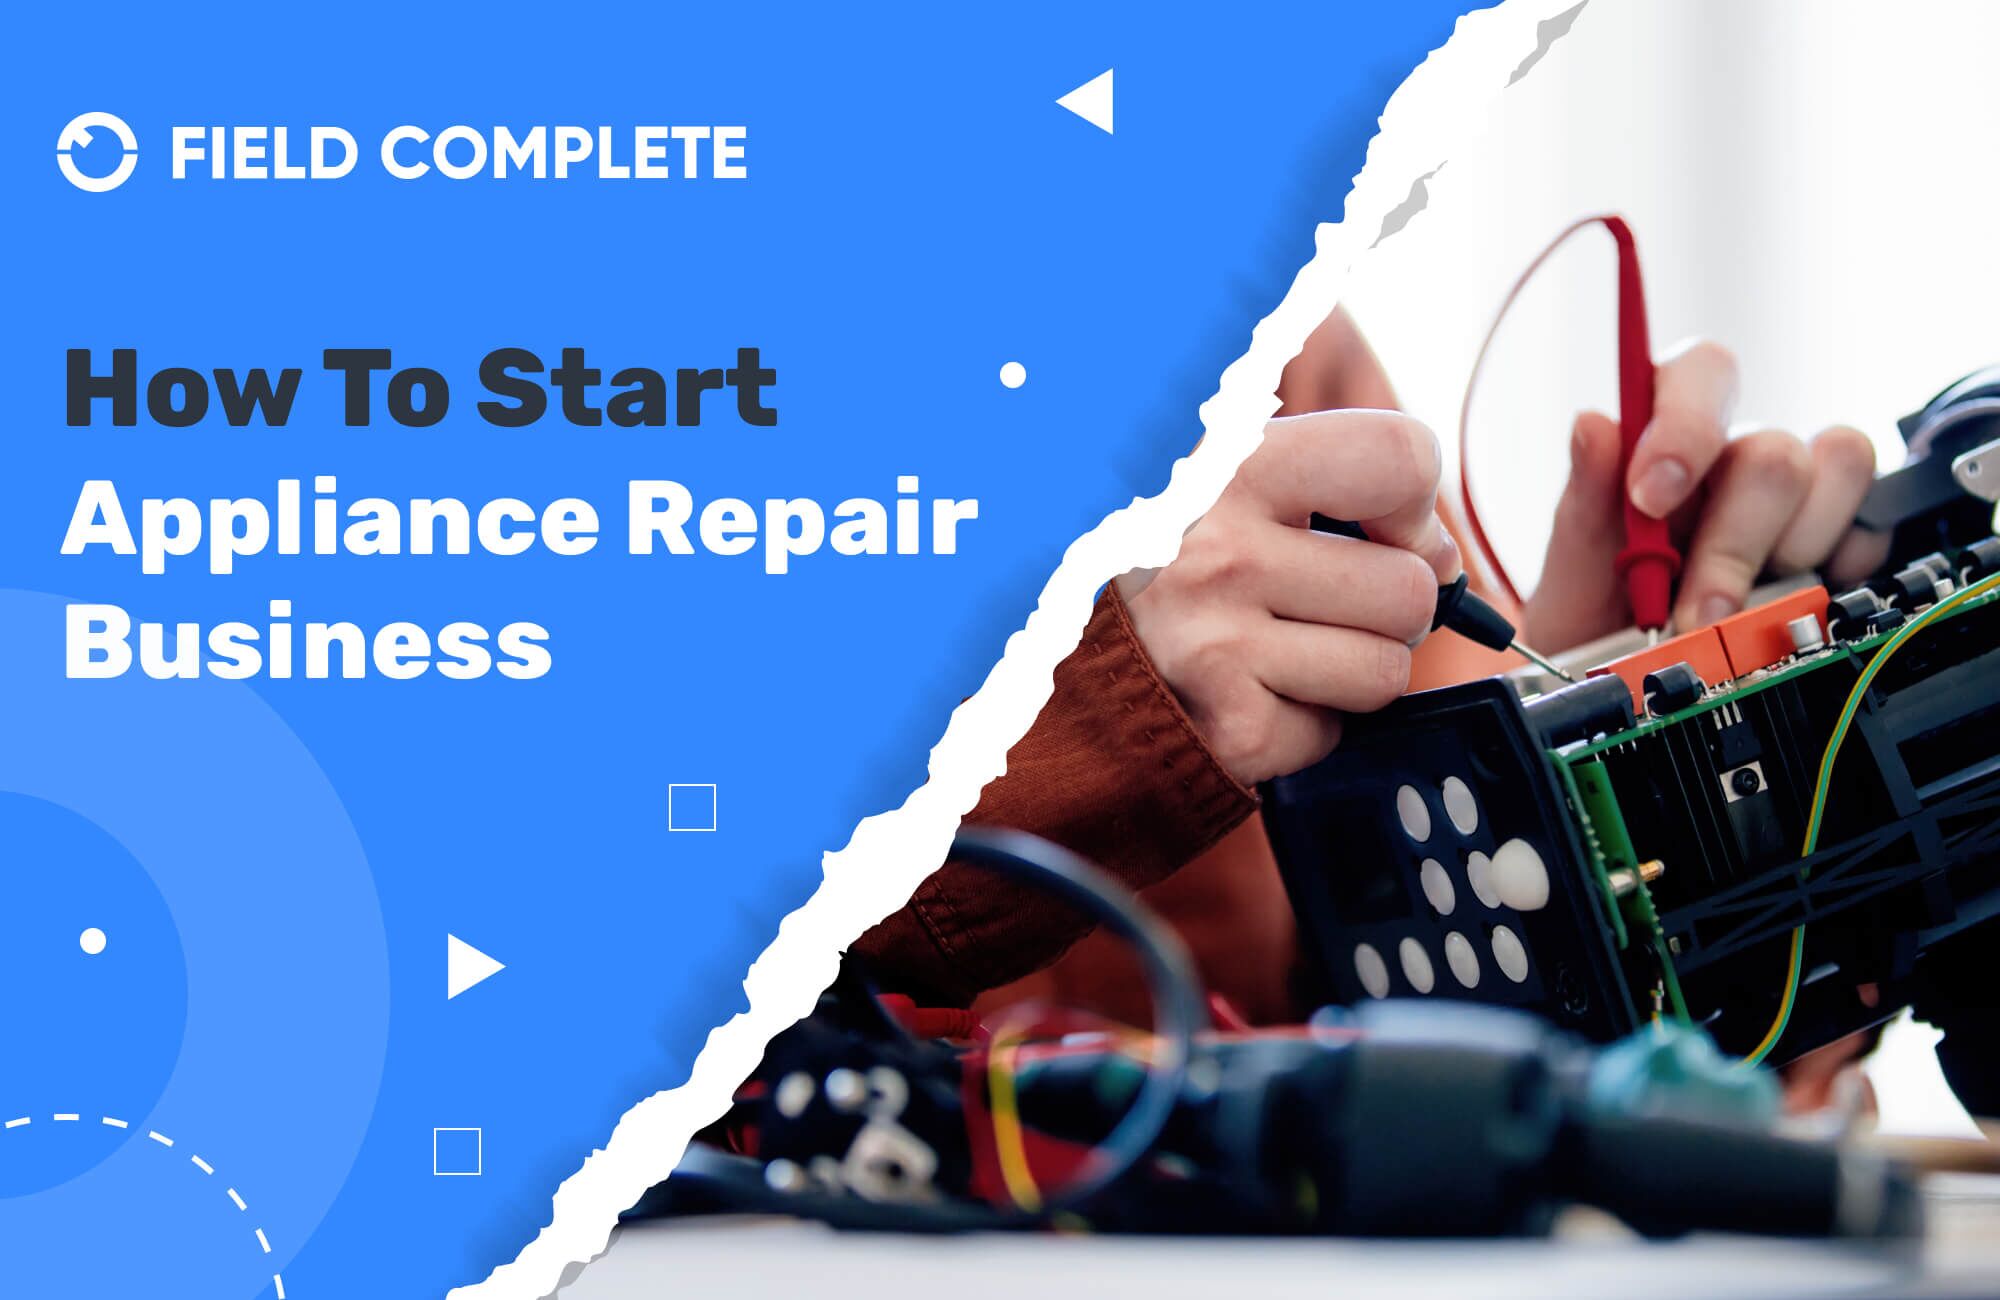 How To Start Appliance Repair Business